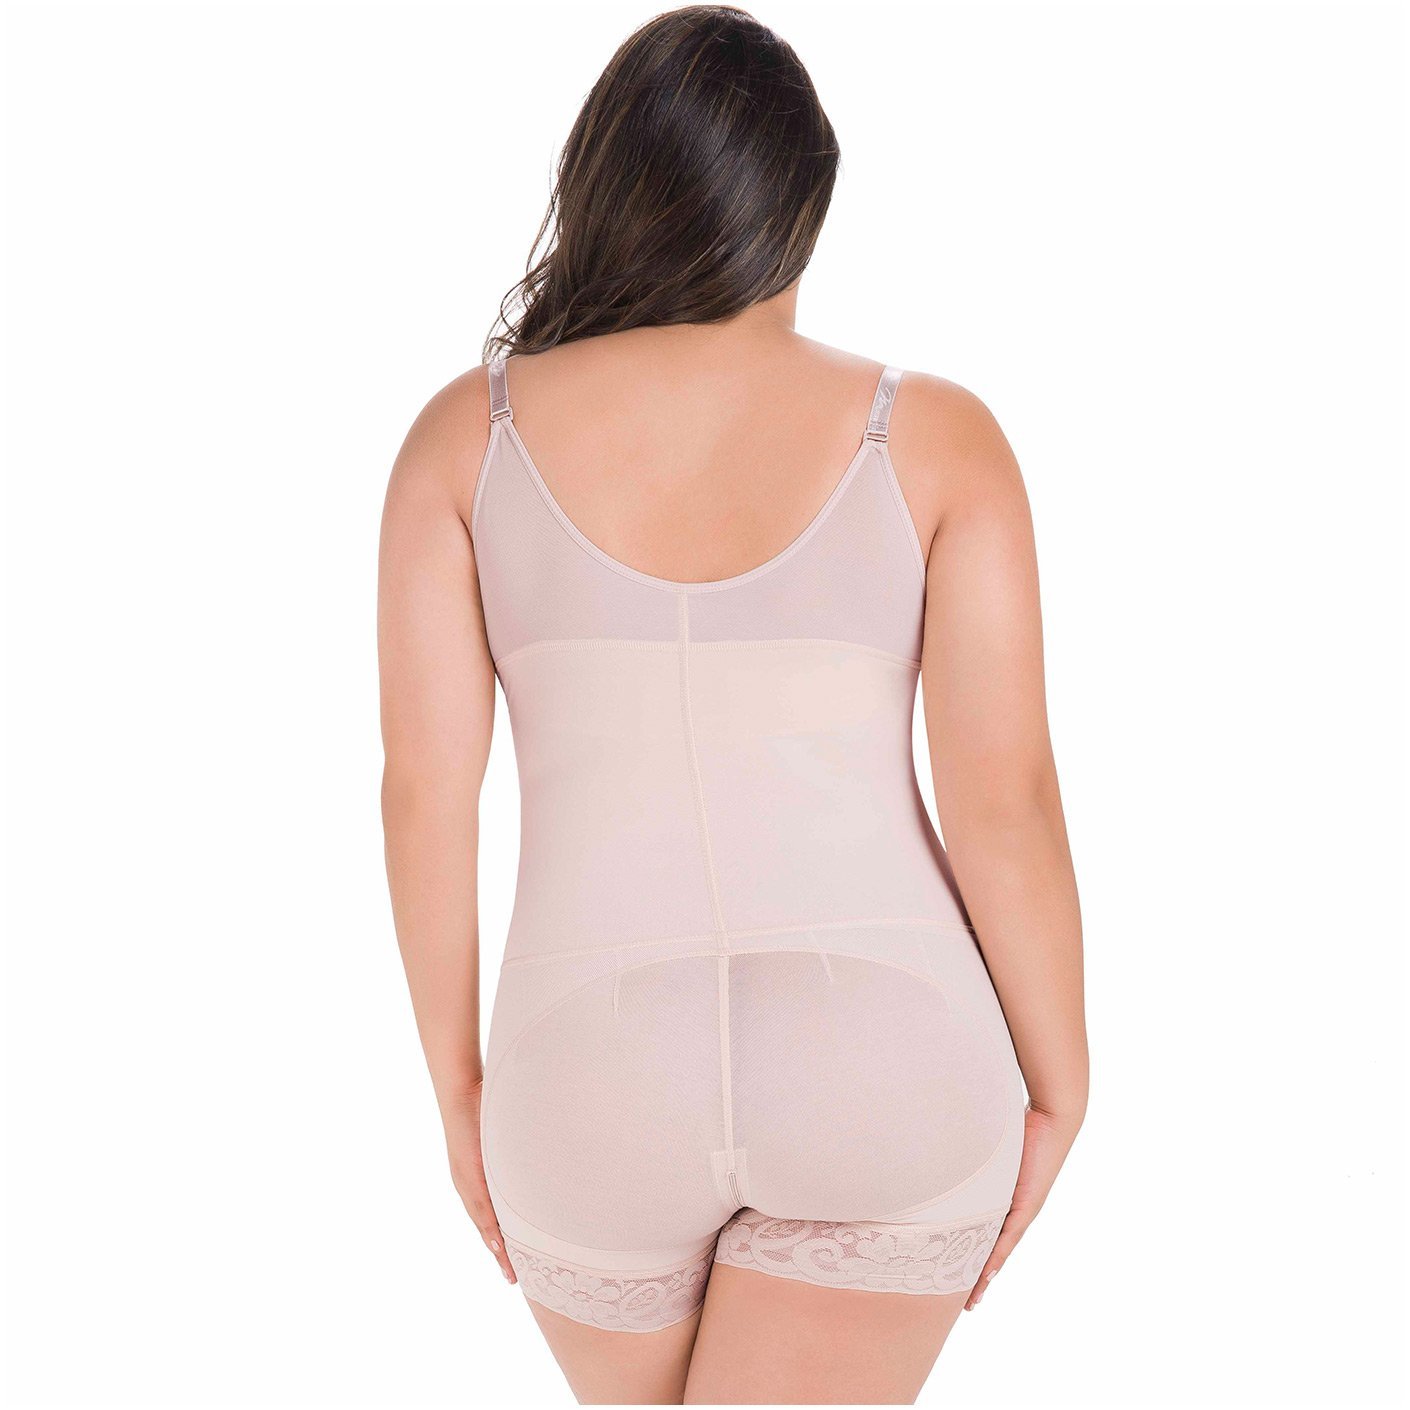 MariaE FP100 Shapewear For Daily Use / Open Bust & Front Closure - New England Supplier